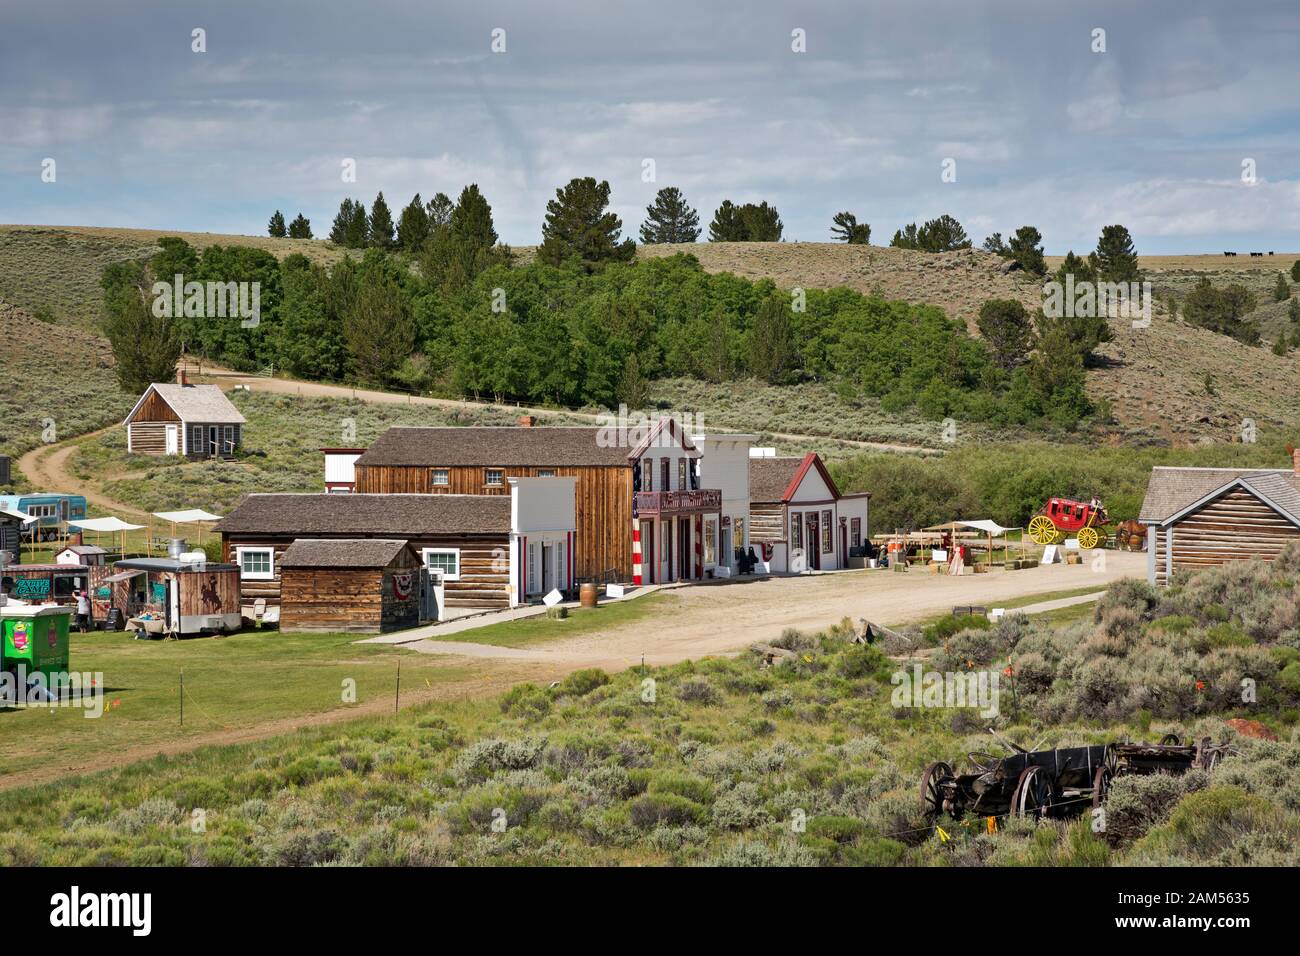 WY03944-00...WYOMING - South Pass City preparing for the second day of their very popular annual Gold Rush Days Celebration. Stock Photo